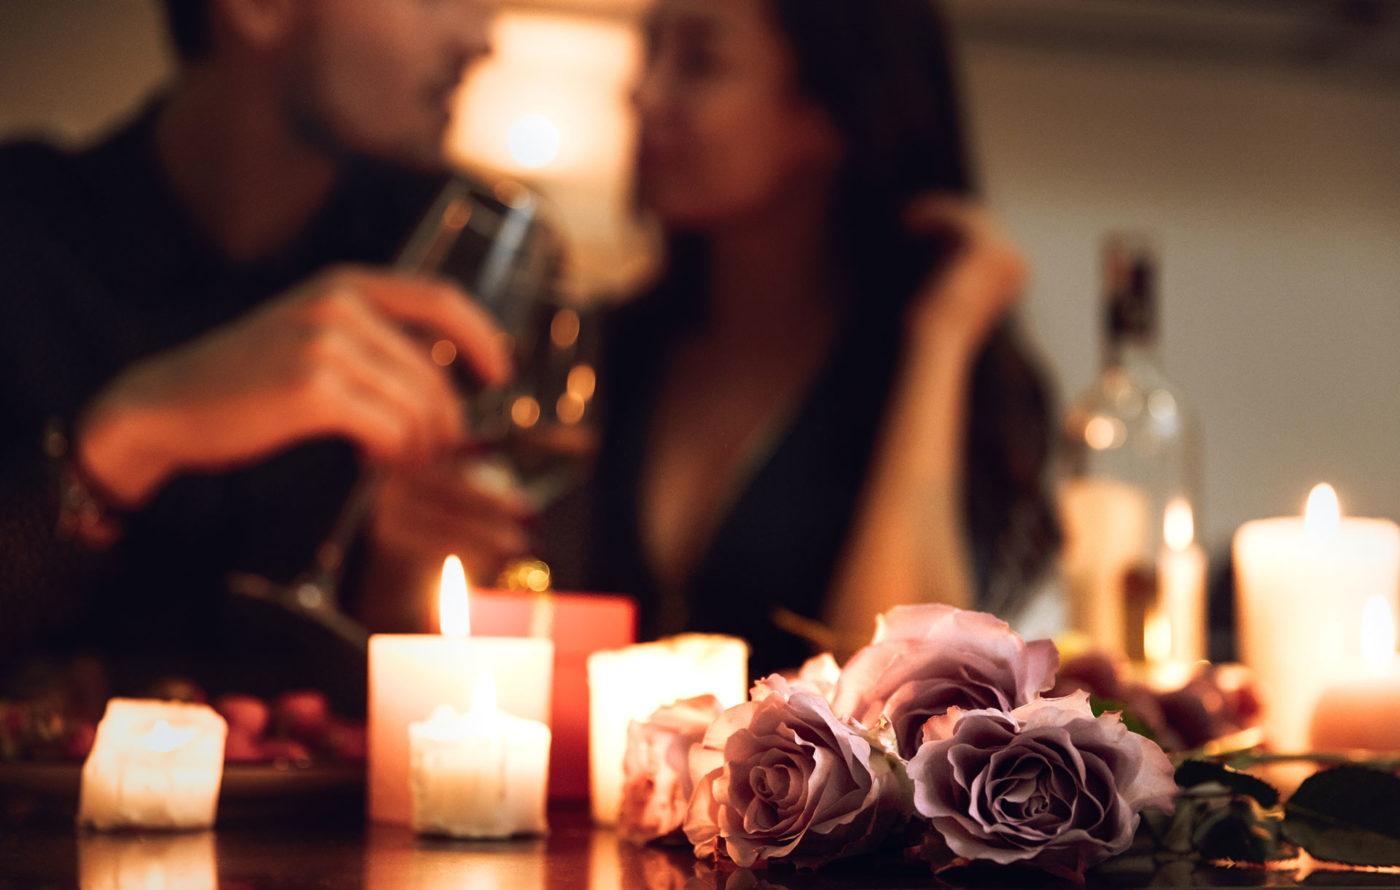 roses and candles sitting on table with blurred couple in background